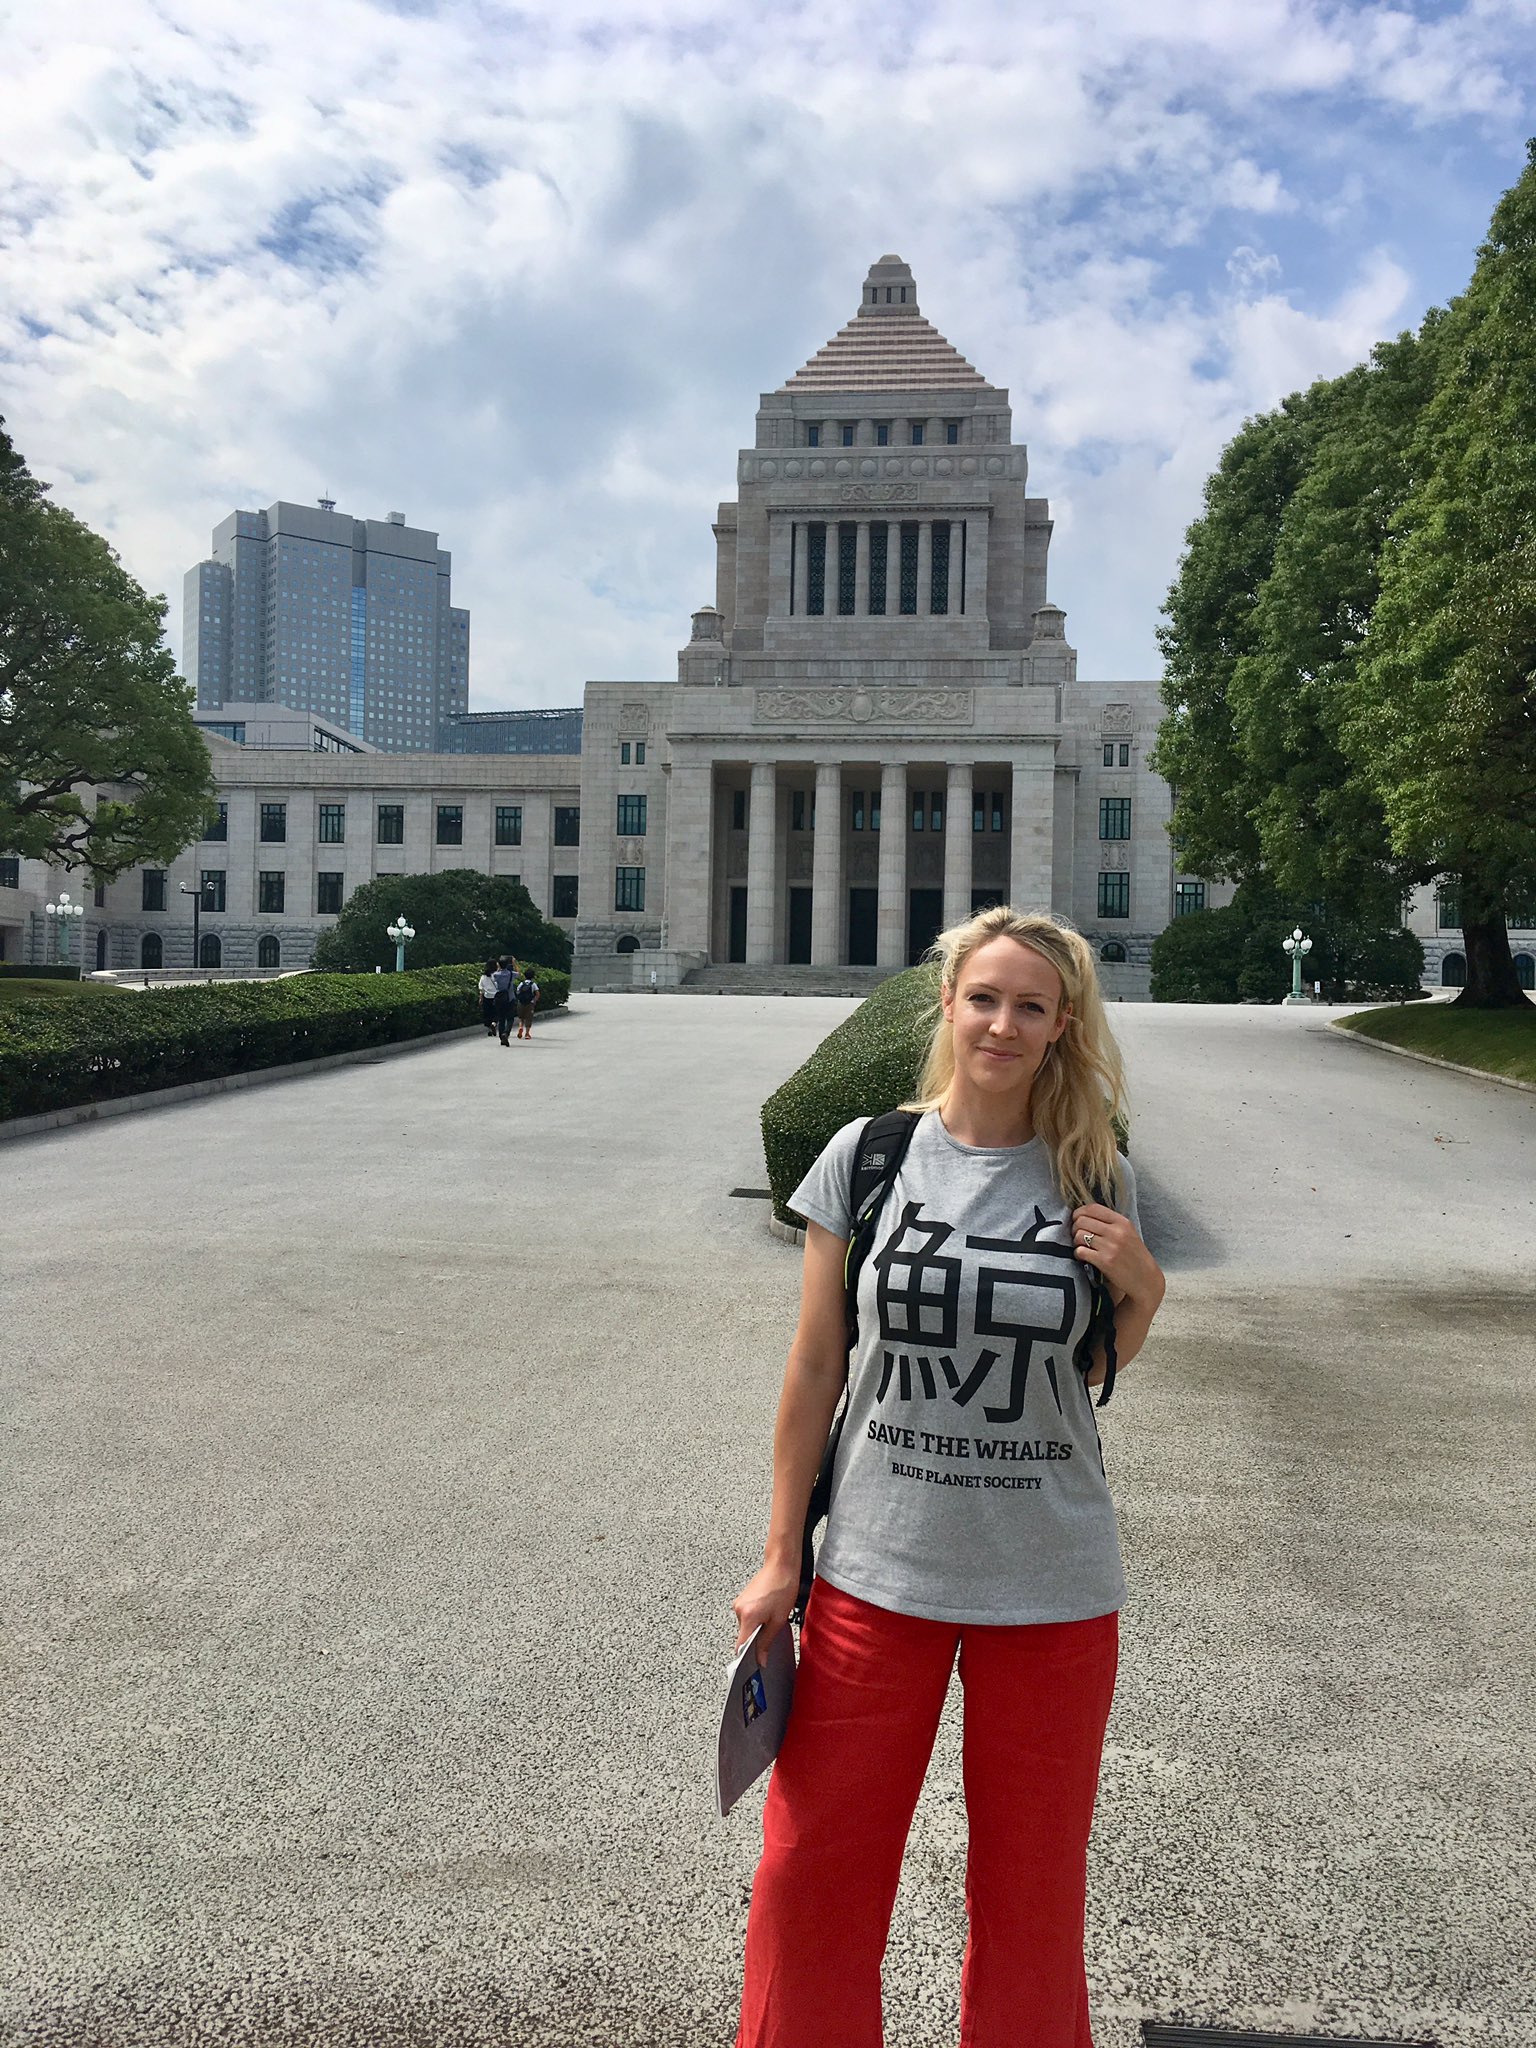 Gemma Care I Love Japan But I Hate Whaling I Walked Around Inside Government Headquarters Of Japan In My Tshirt Today Hoping Workers May Have Noticed As They